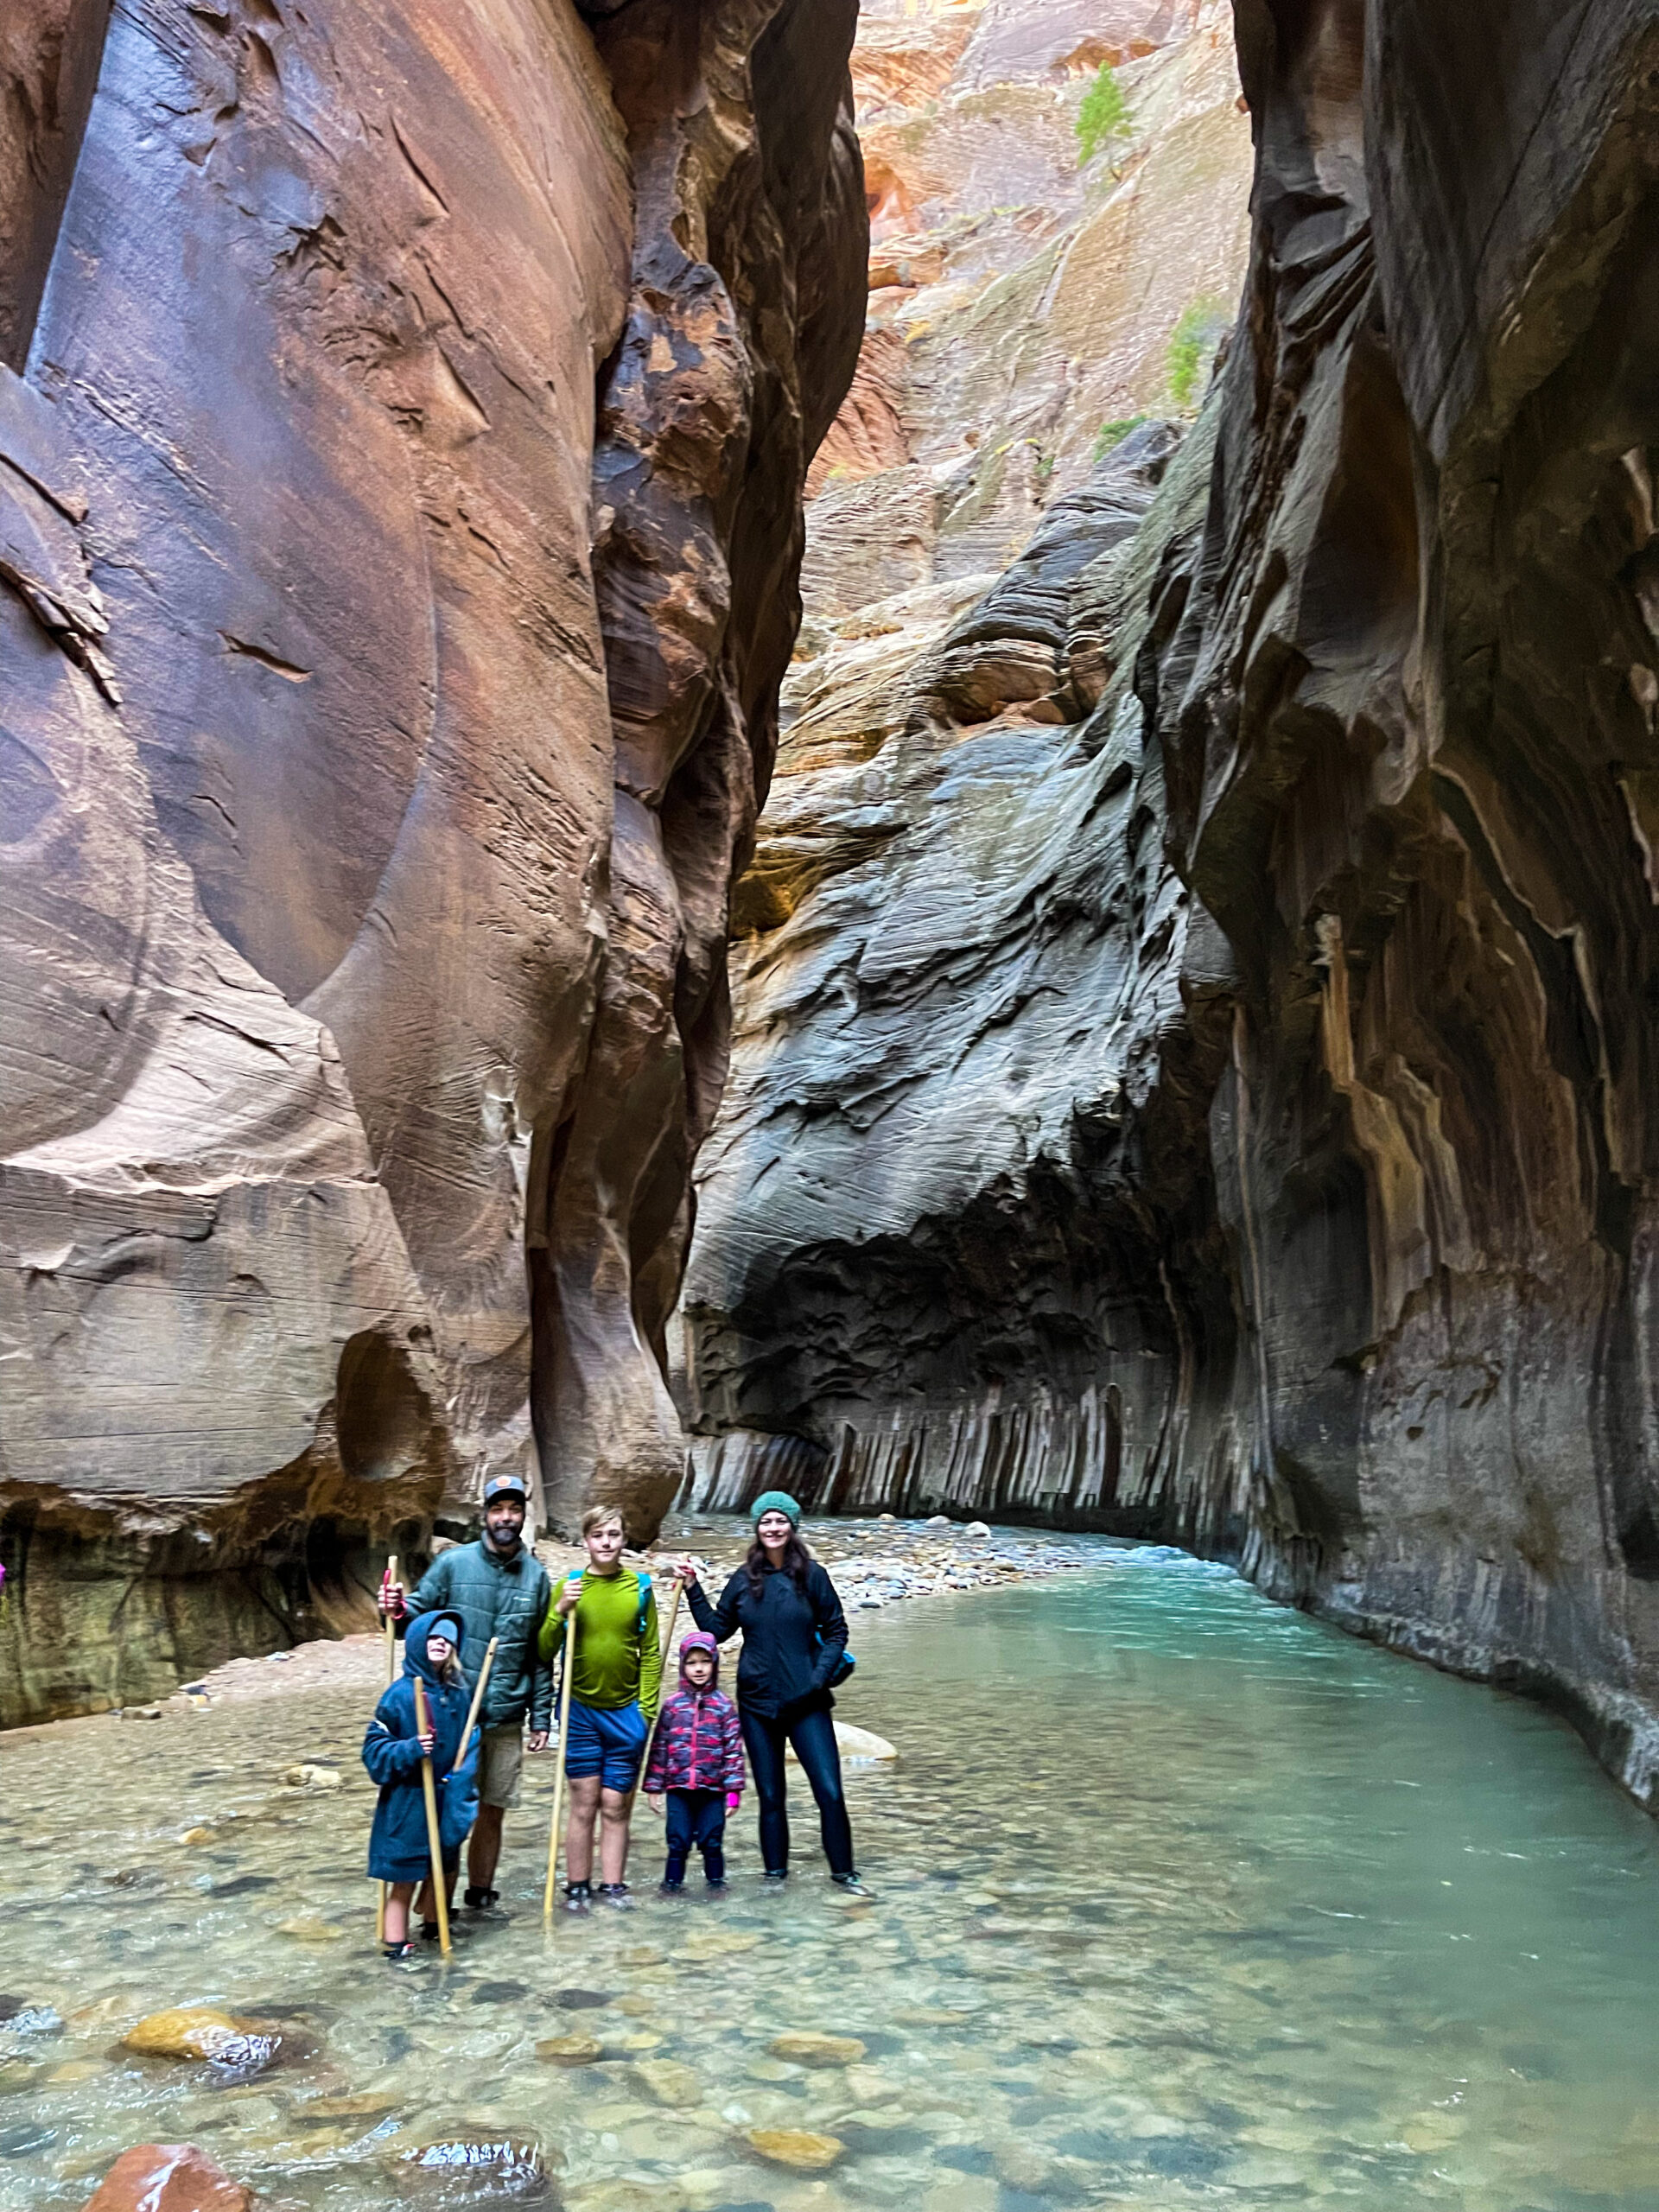 Read more about the article How To Hike The Narrows With Kids and Come Out Smiling